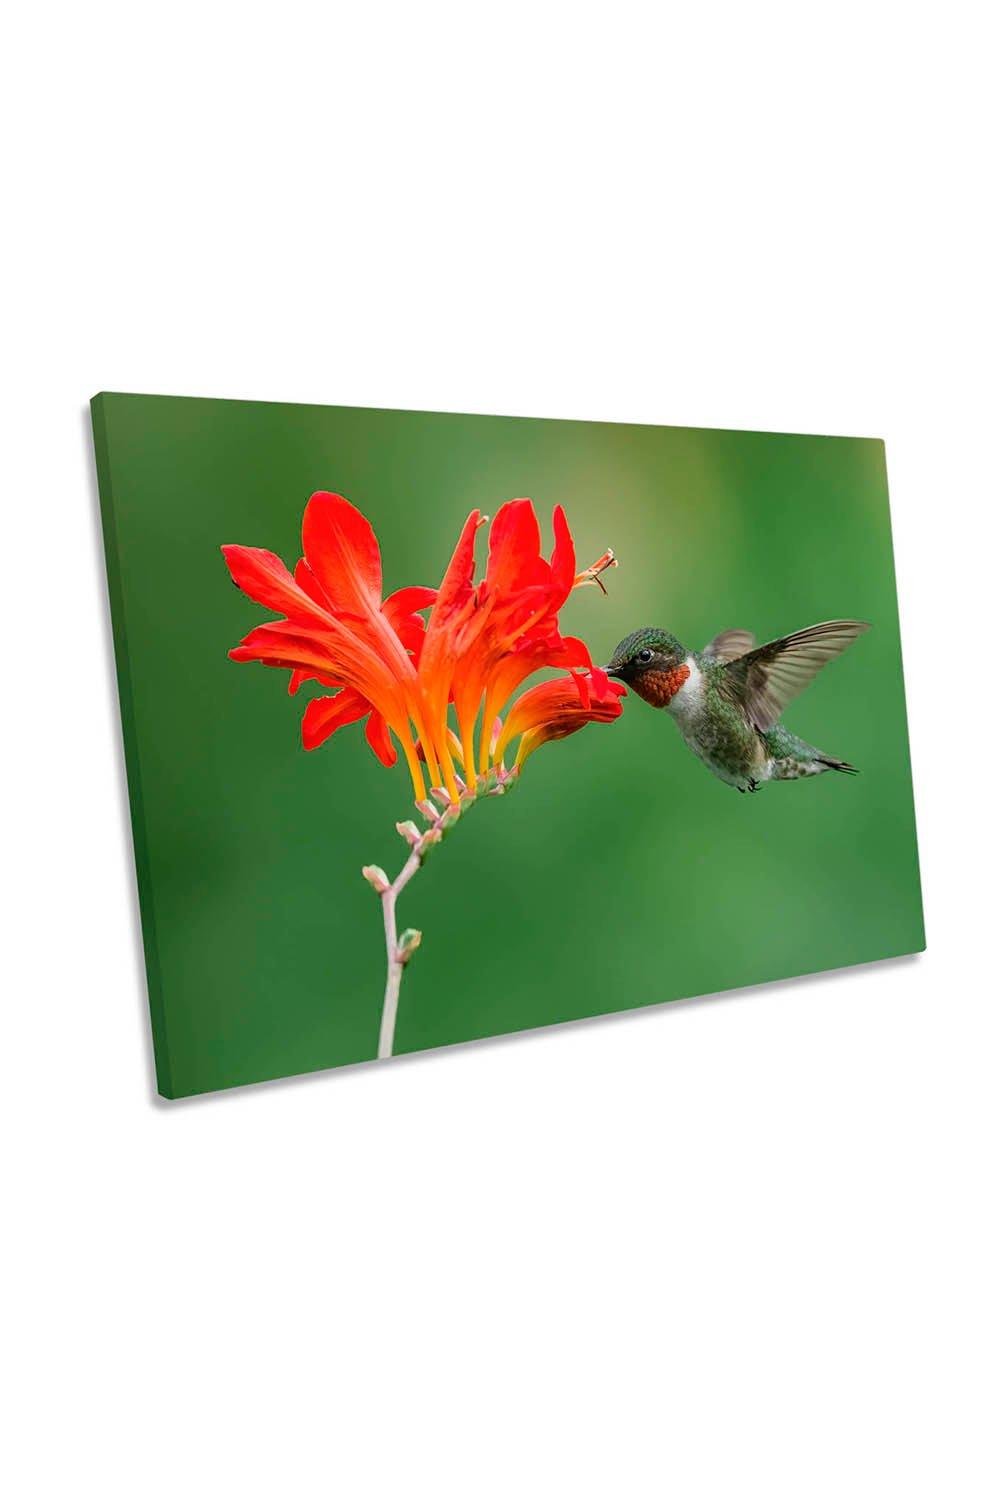 Ruby Throated Hummingbird Flower Canvas Wall Art Picture Print